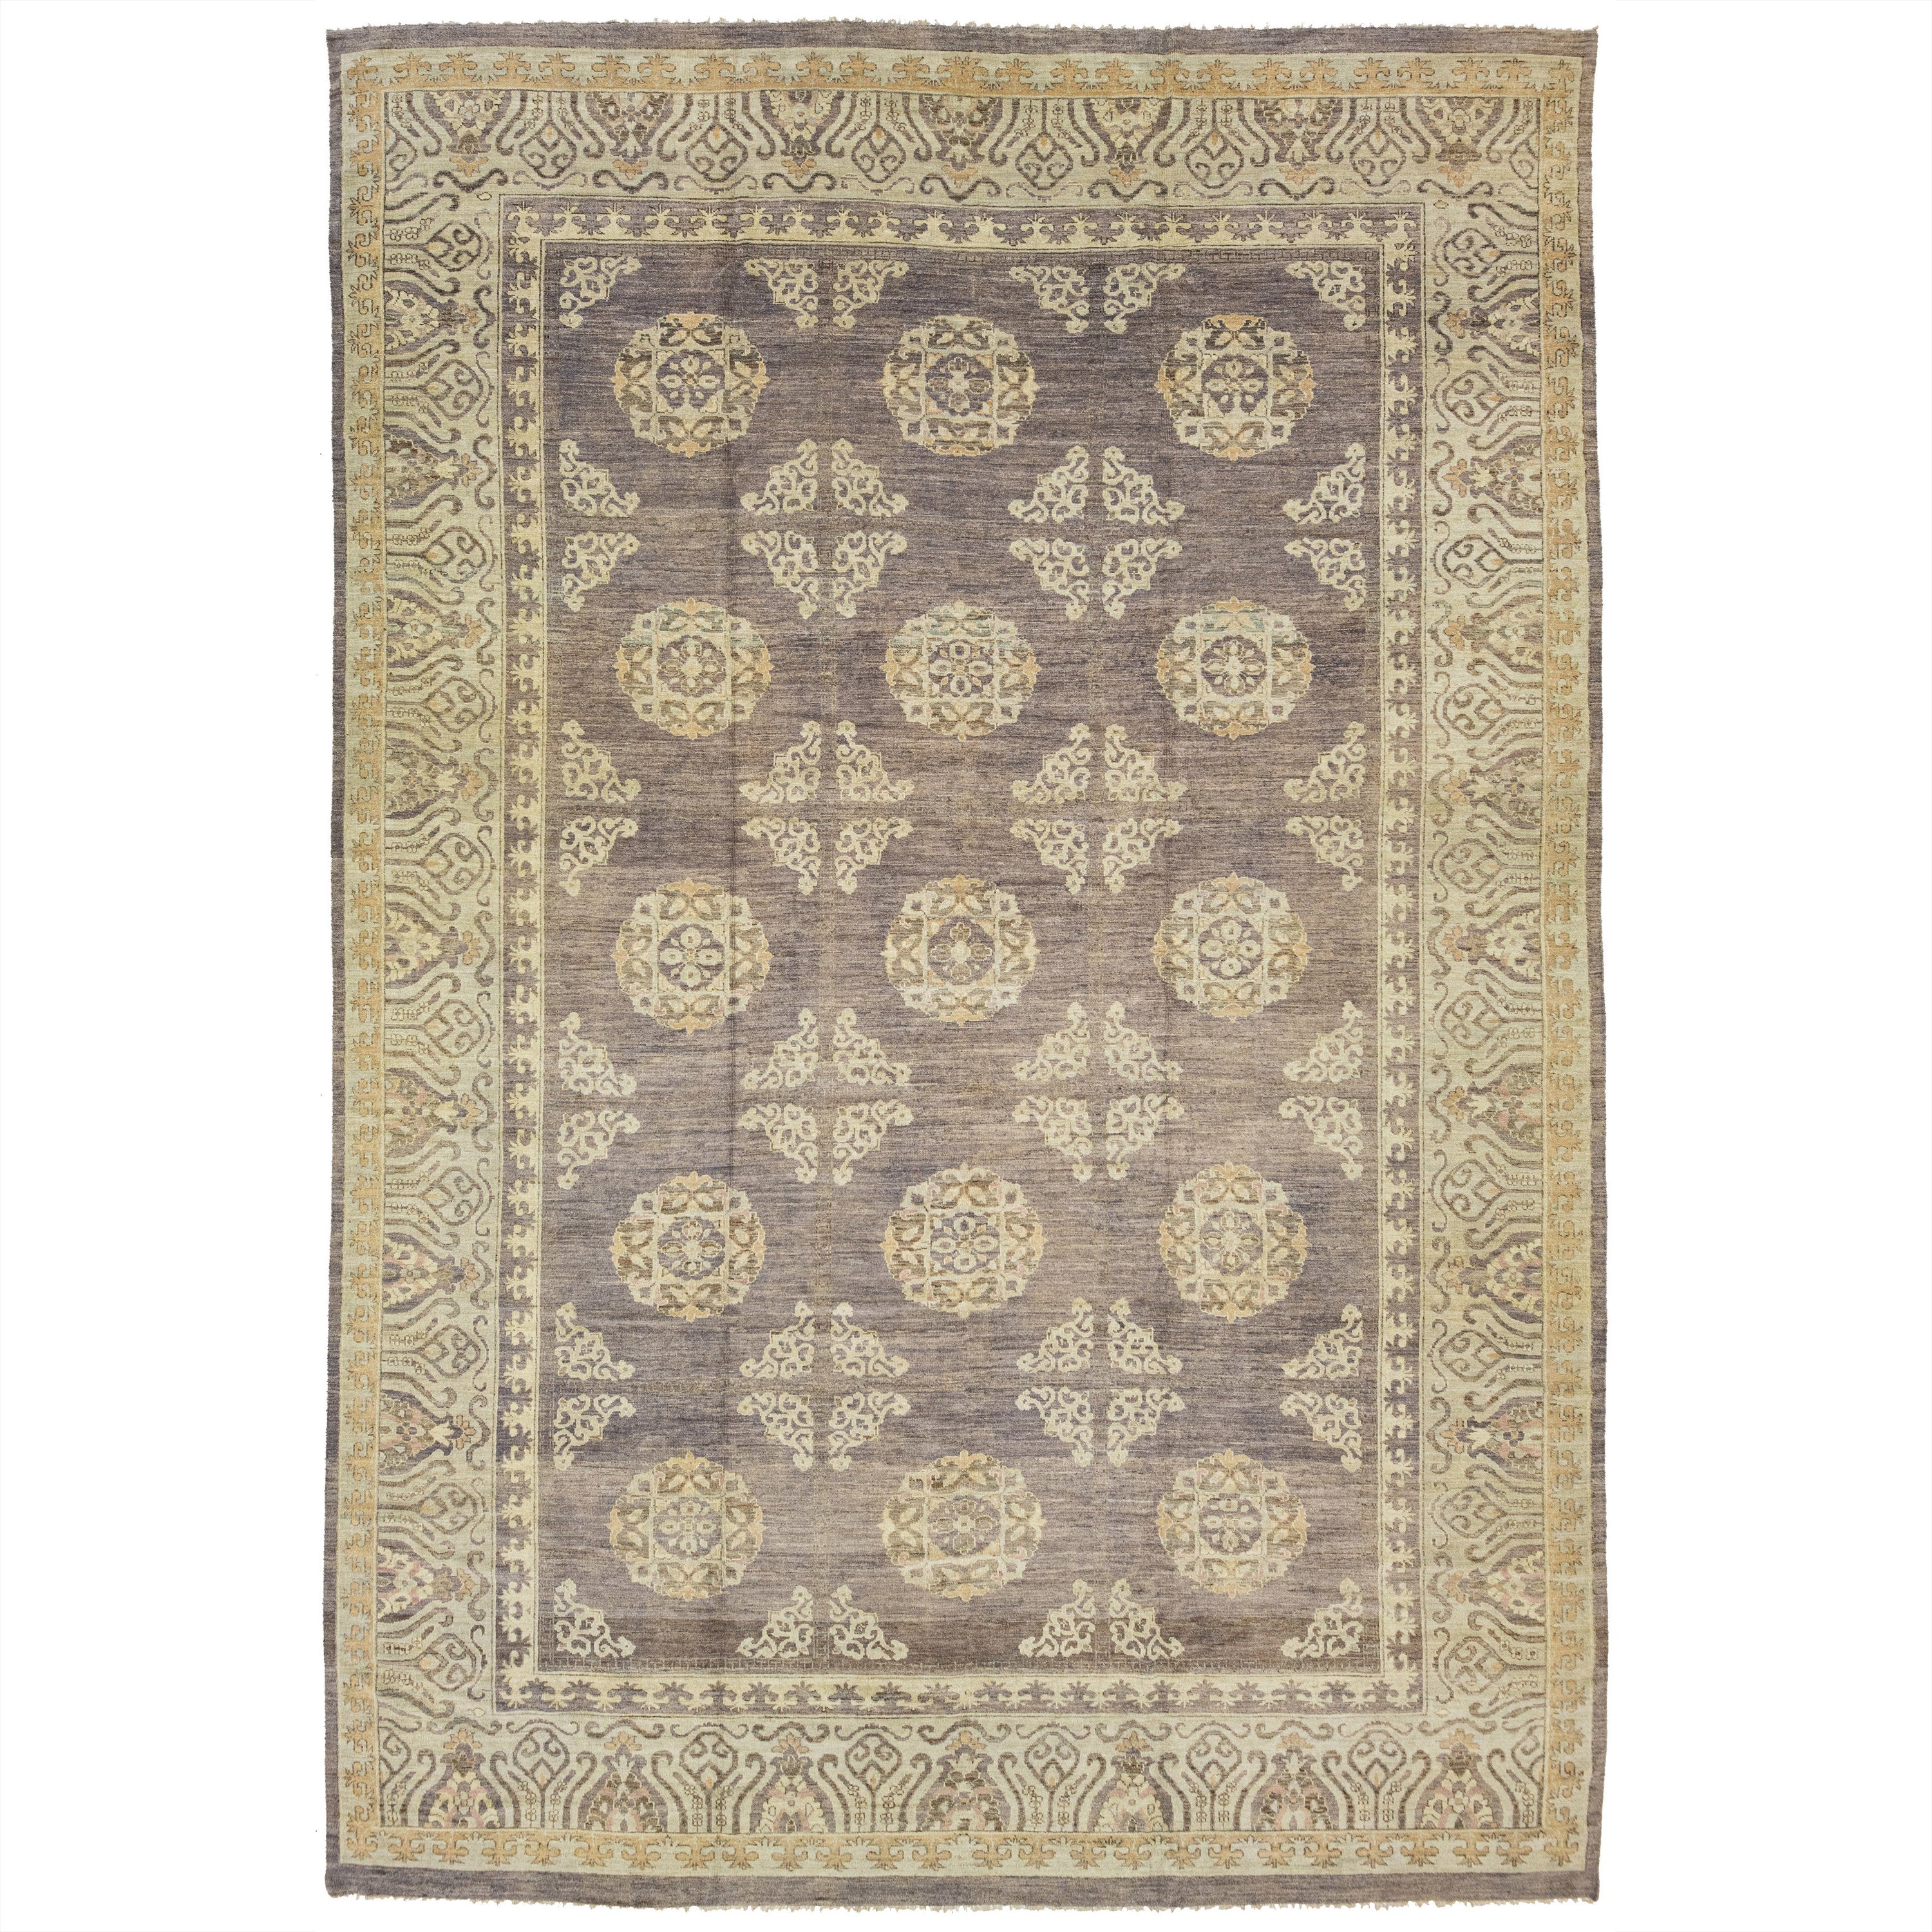 Allover Designed Modern Khotan Wool Rug Handmade In Brown and Blue Field Colors 